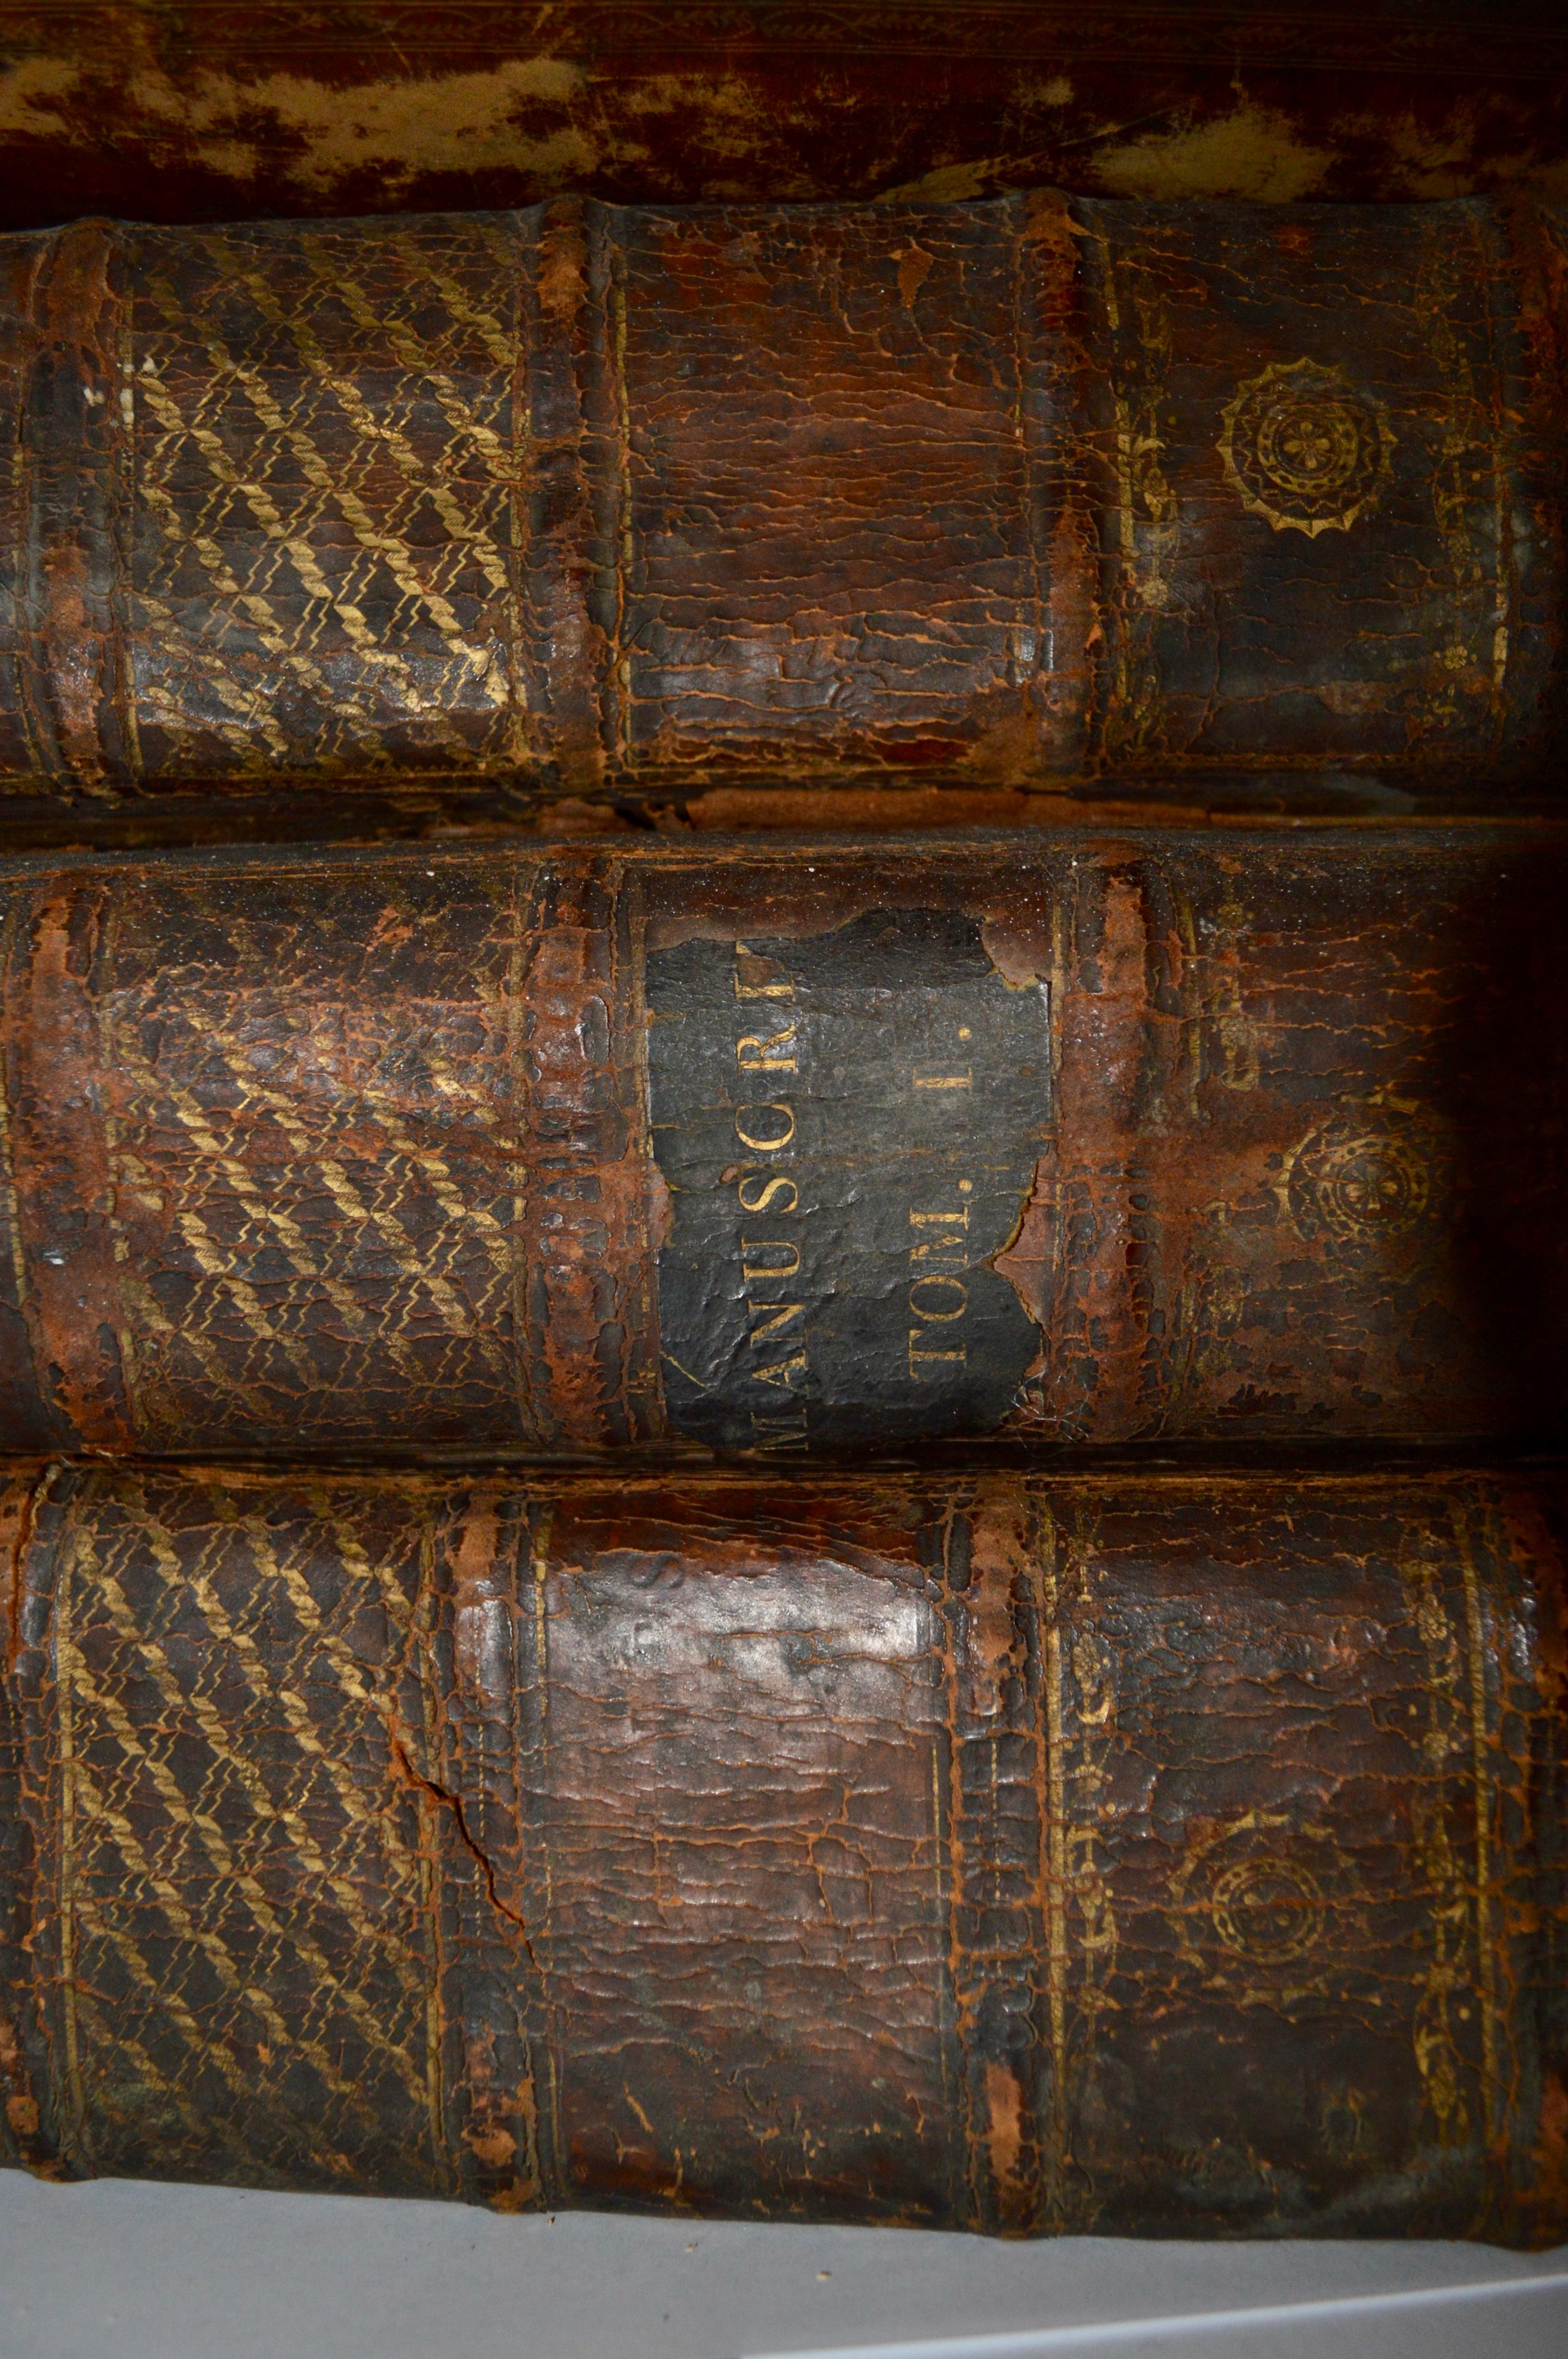 Set of four large thick, 18th century leather-bound books for decoration
Latin text, catalogues 
